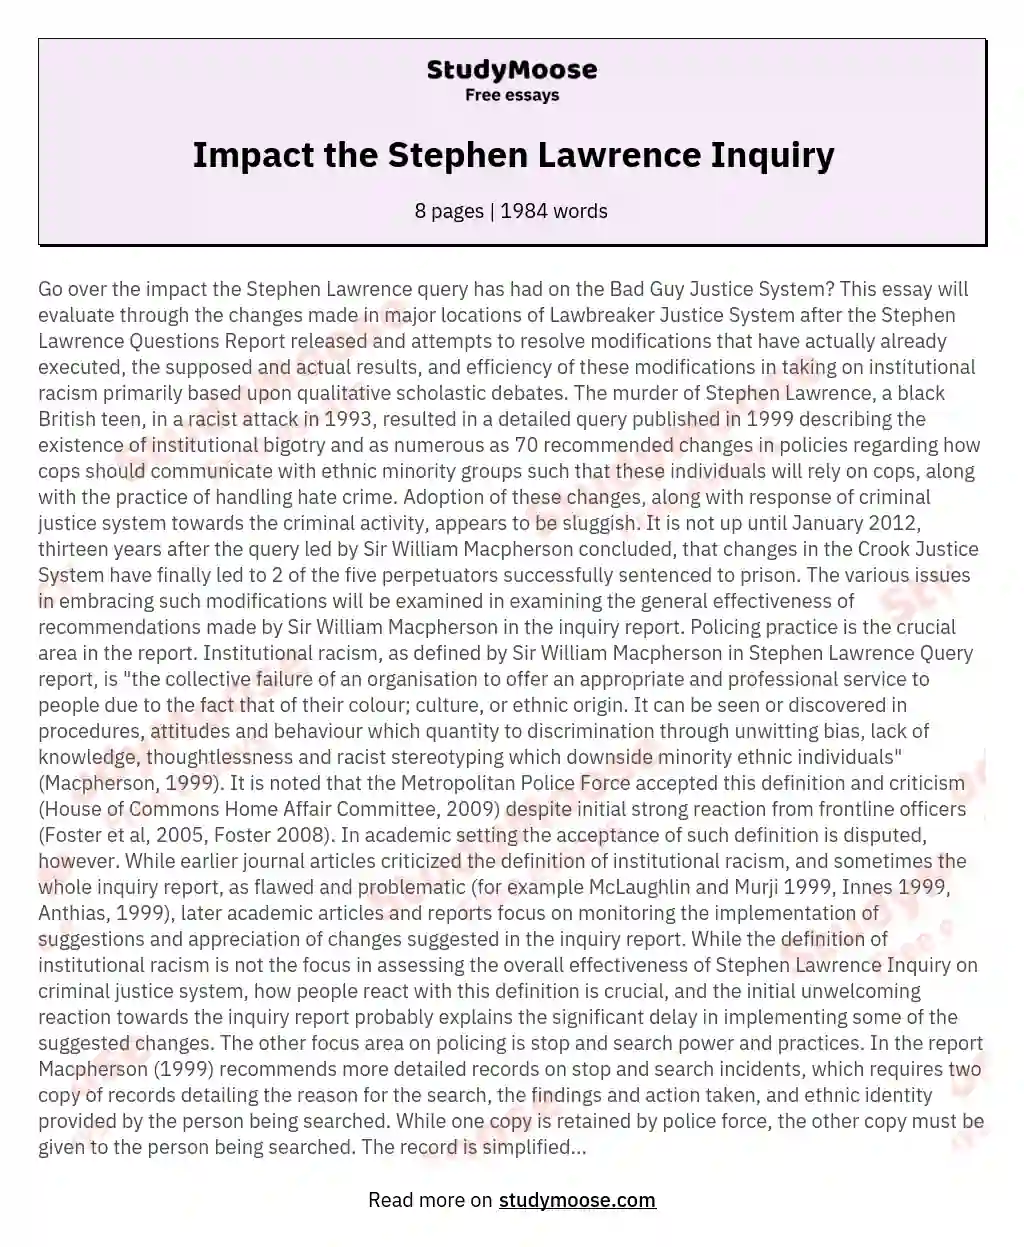 Impact the Stephen Lawrence Inquiry